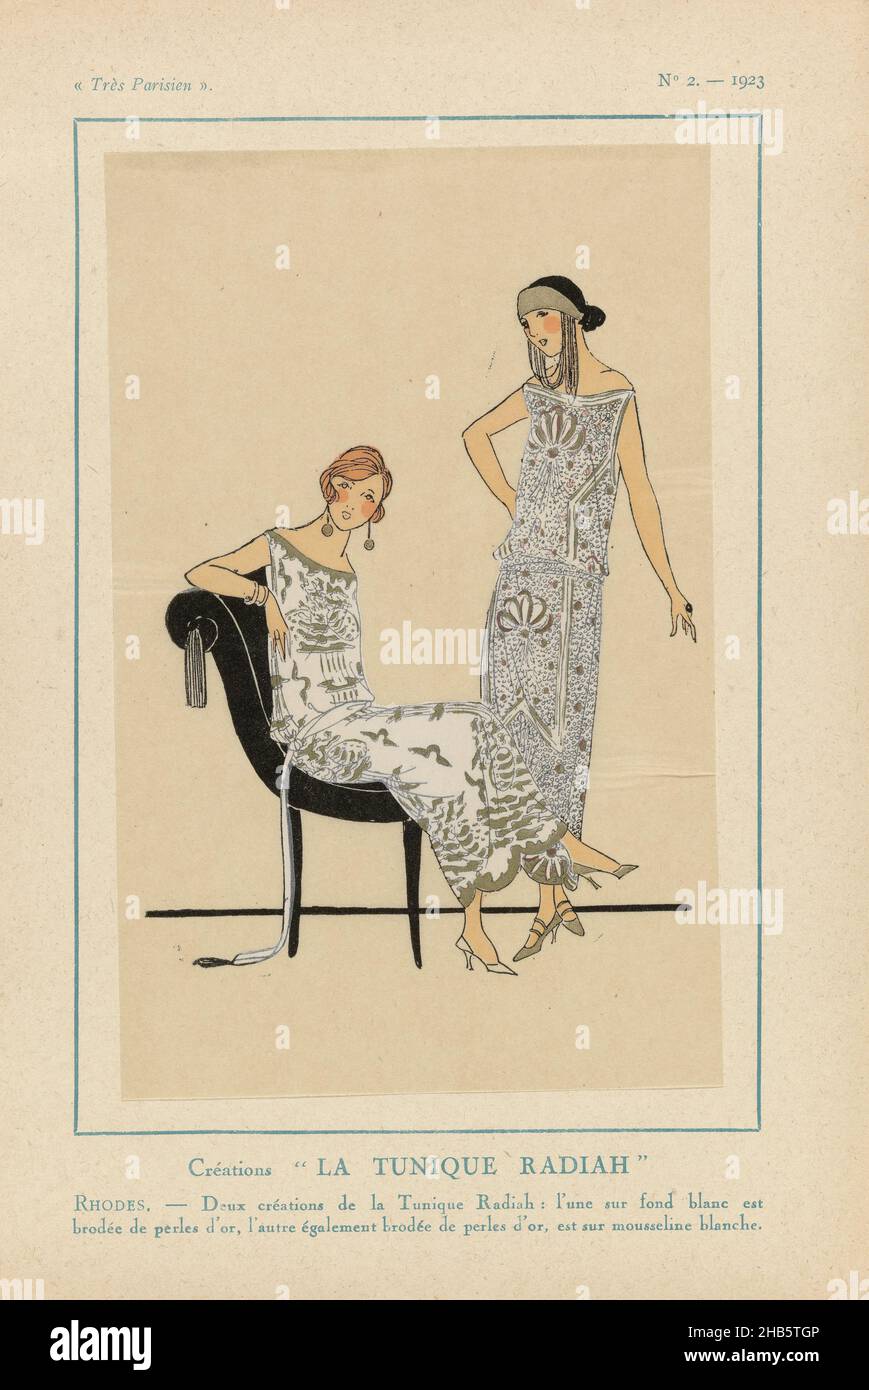 Très Parisien, 1923, No. 2: Créations LA TUNIQUE RADIAH ..., Two designs by La Tunique Radiah: one on a white background and embroidered with gold beads, the other idem embroidered with gold beads on a white muslin. Accessories: headband, earrings, pumps and/or shoes with straps. Print from the fashion magazine Très Parisien (1920-1936)., print maker: anonymous, La Tunique Radiah (mentioned on object), Paris, 1923, paper, letterpress printing, height 269 mm × width 180 mm Stock Photo